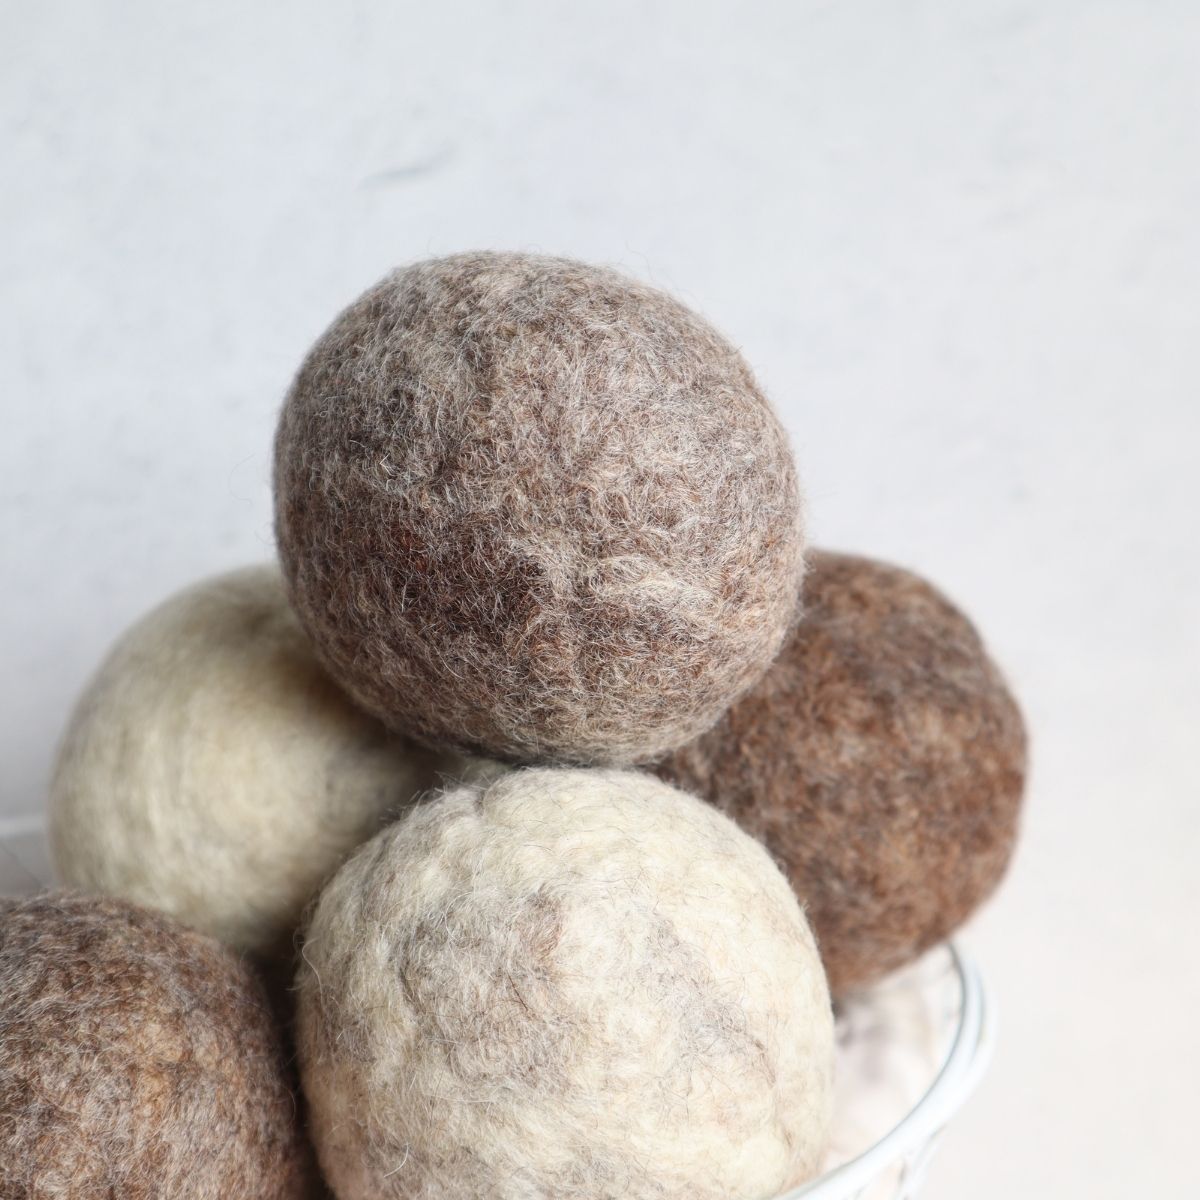 Wool Dryer Balls: How to Use & Cost Saving Experiment - Recipes with Essential  Oils